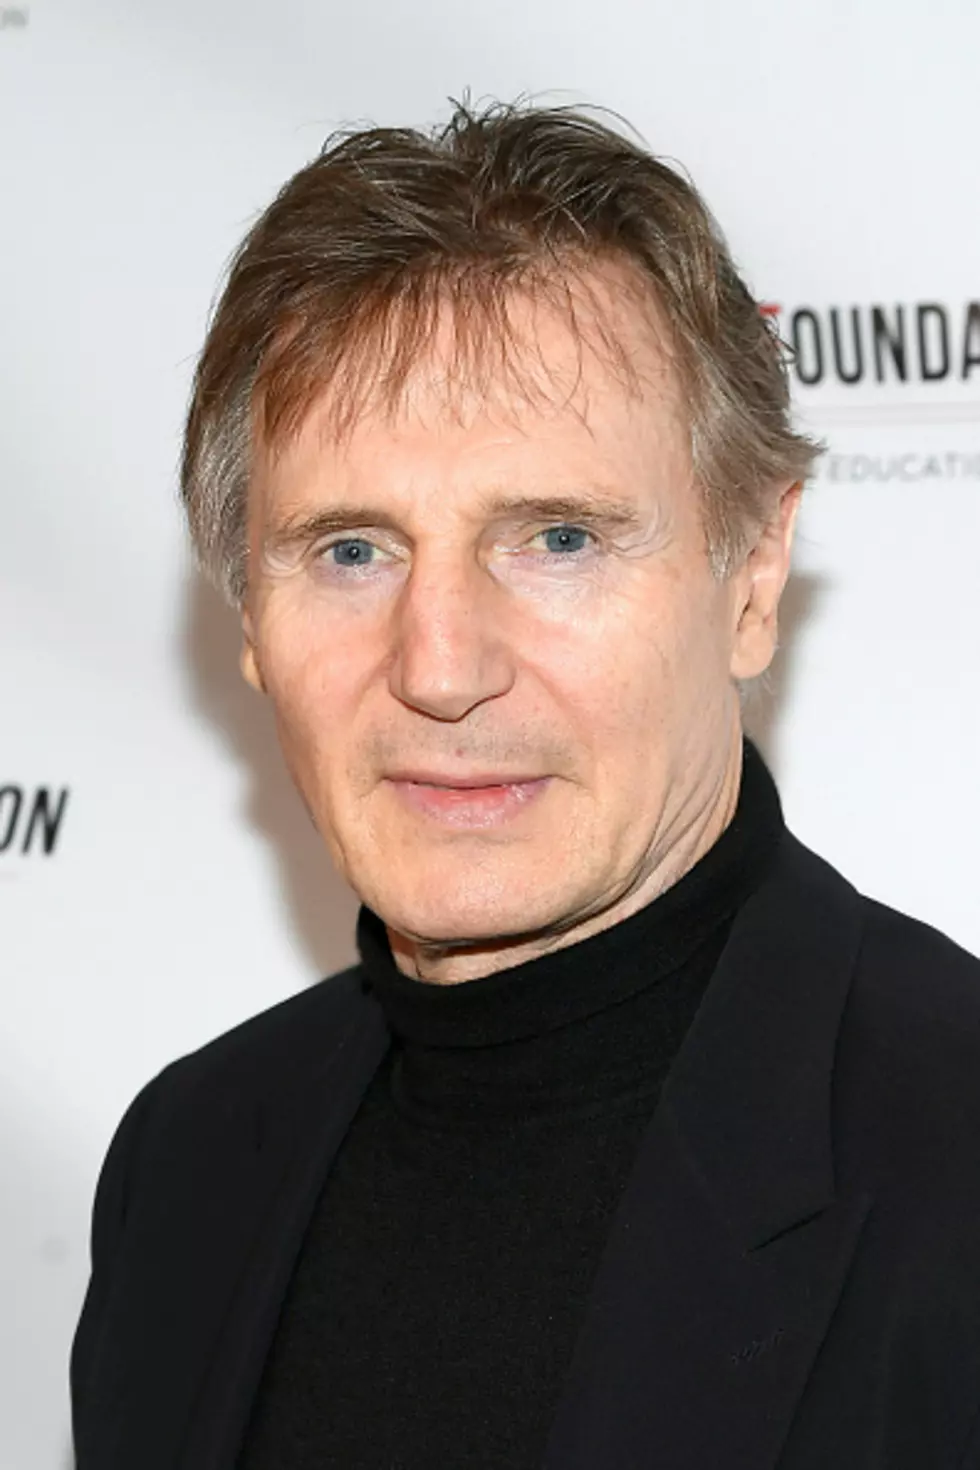 Liam Neeson Claims He’s Not A Racist.